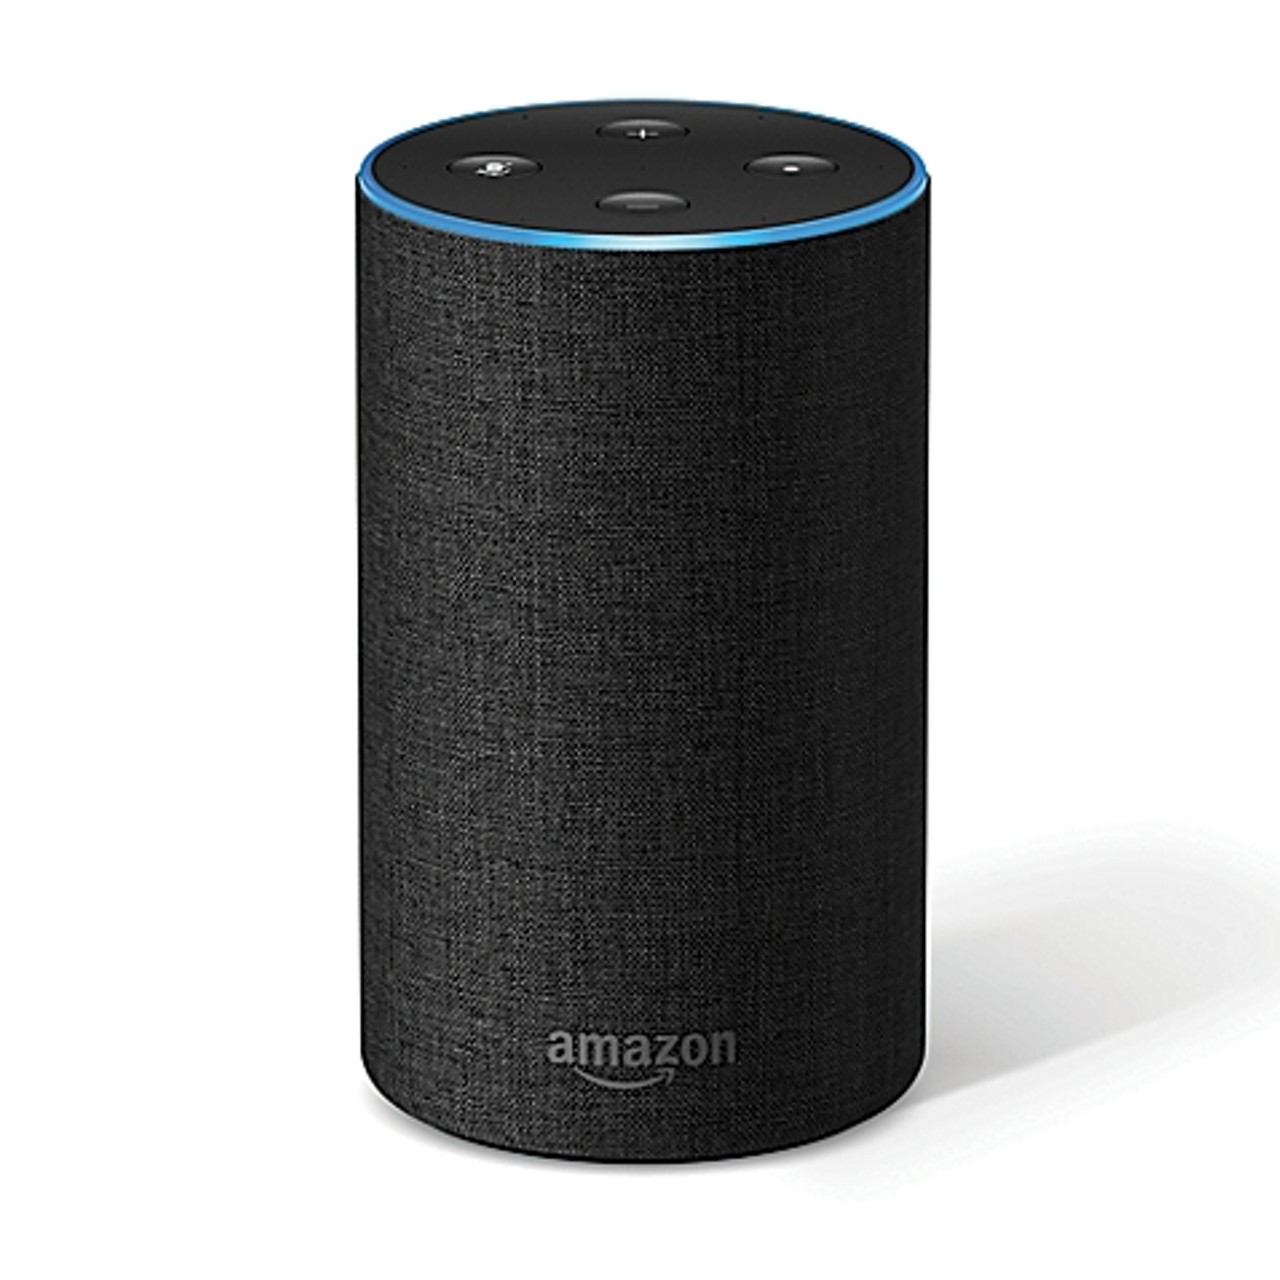 5. Alexa can be the announcer for all games and events held at Quicken Loans Arena (or any other arena built for the Cavs). 
Photo via Amazon.com